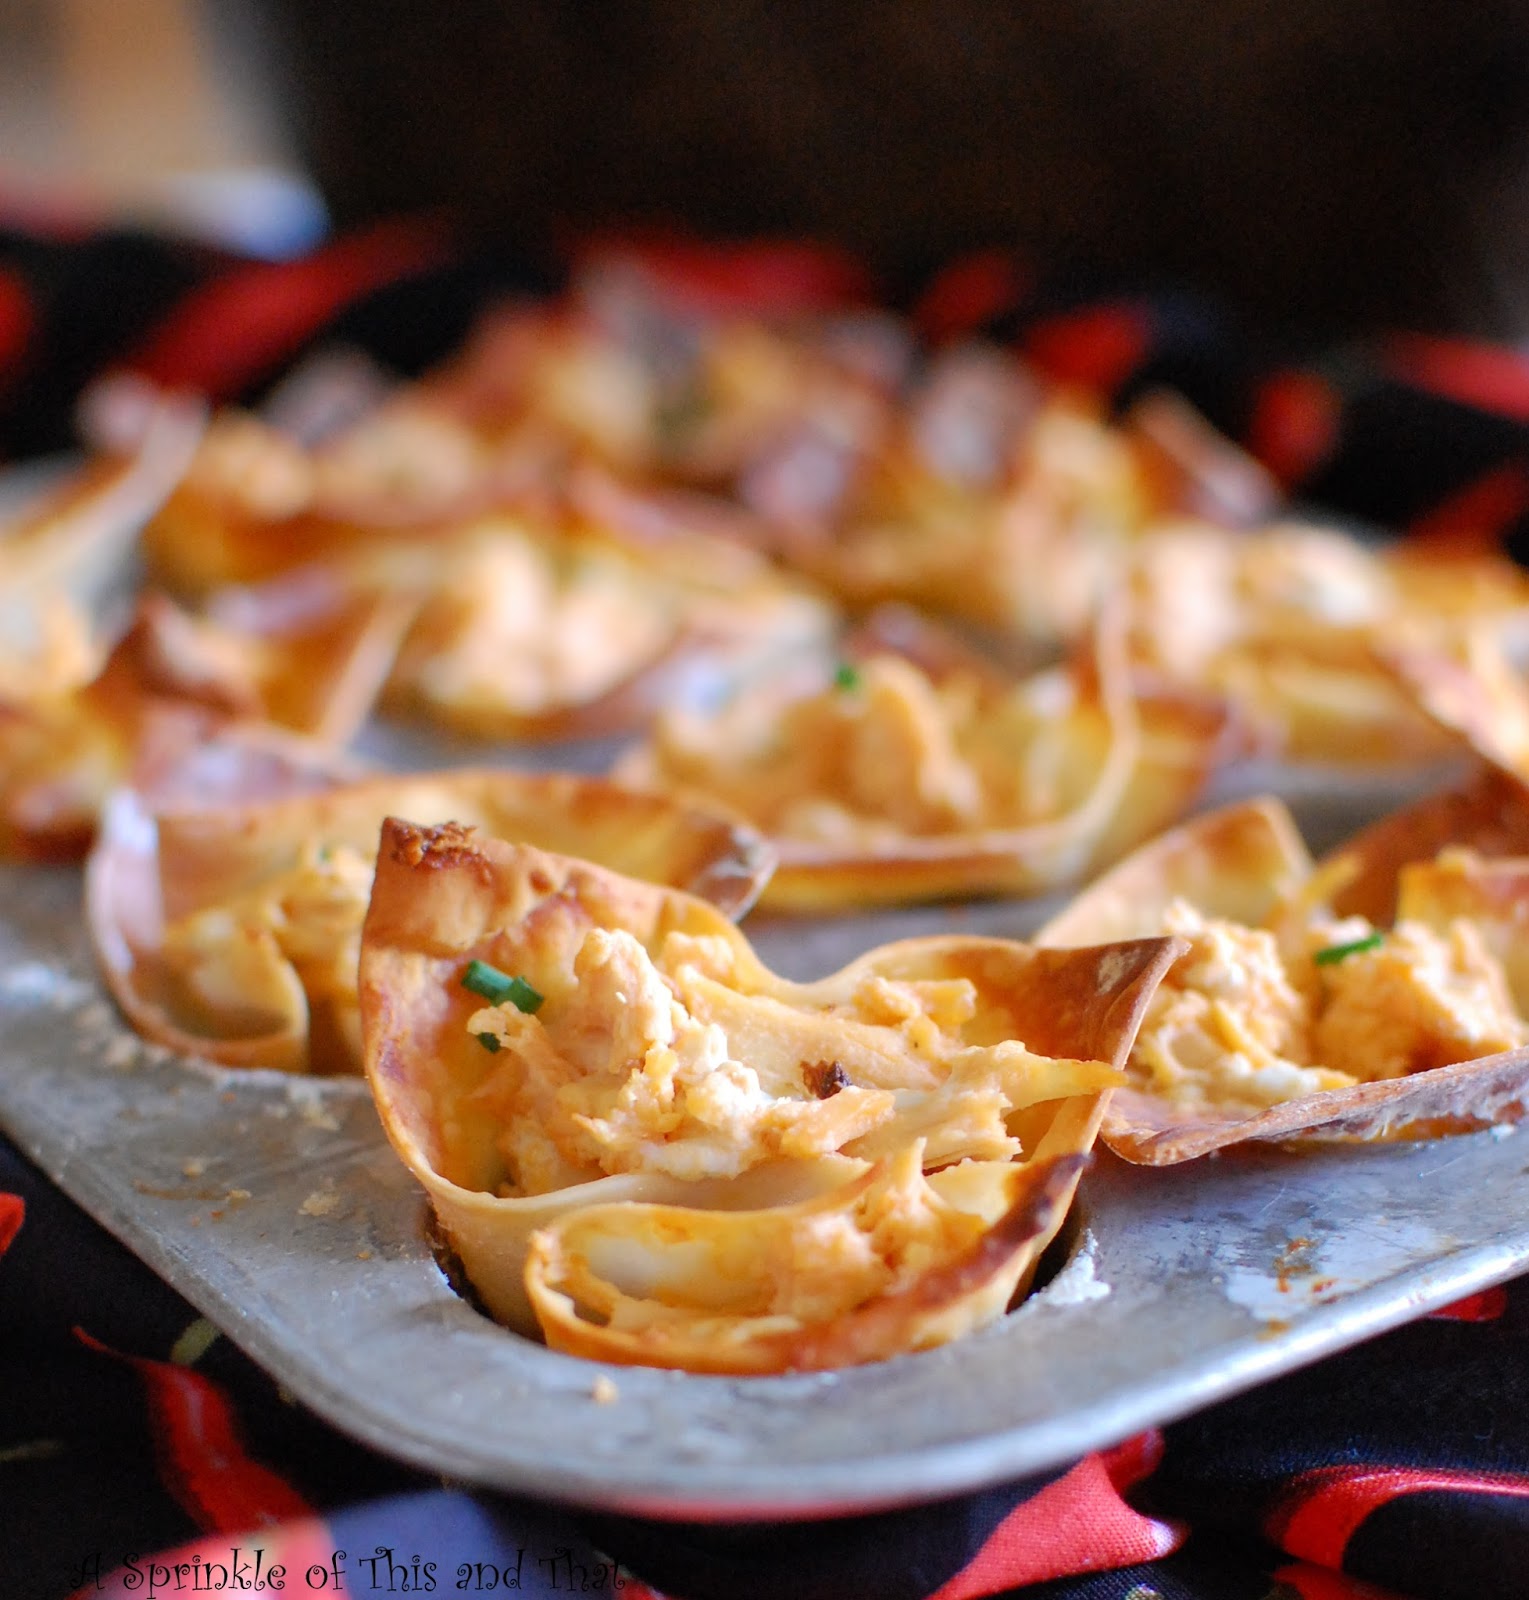 A Sprinkle of This and That: Wacky for Wontons